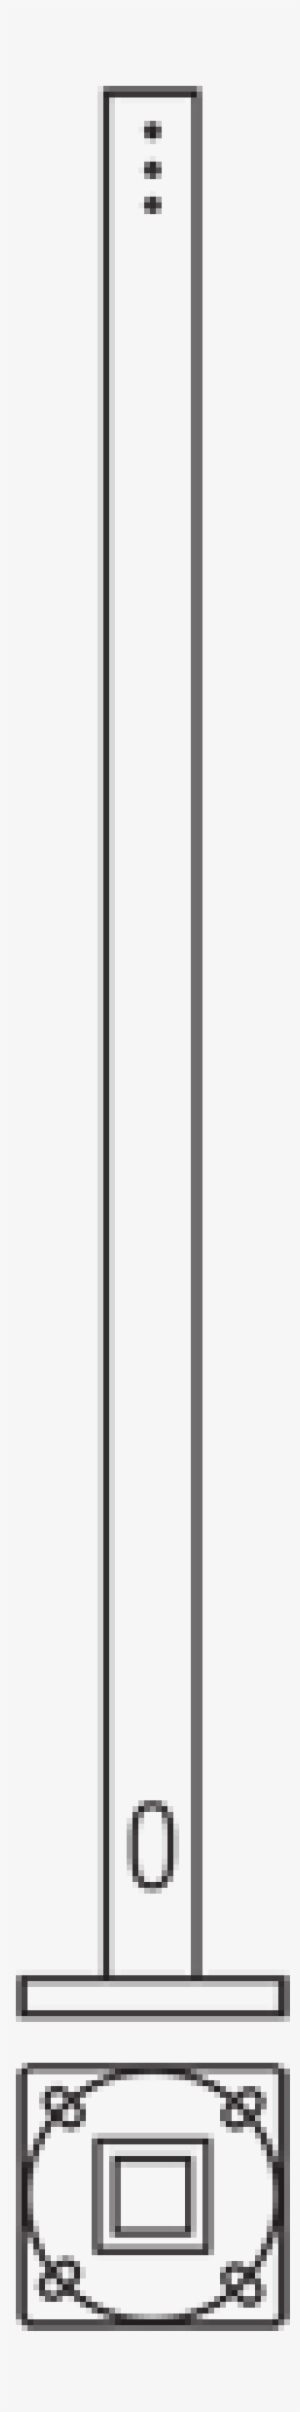 Ssp Square Steel Poles - Silver